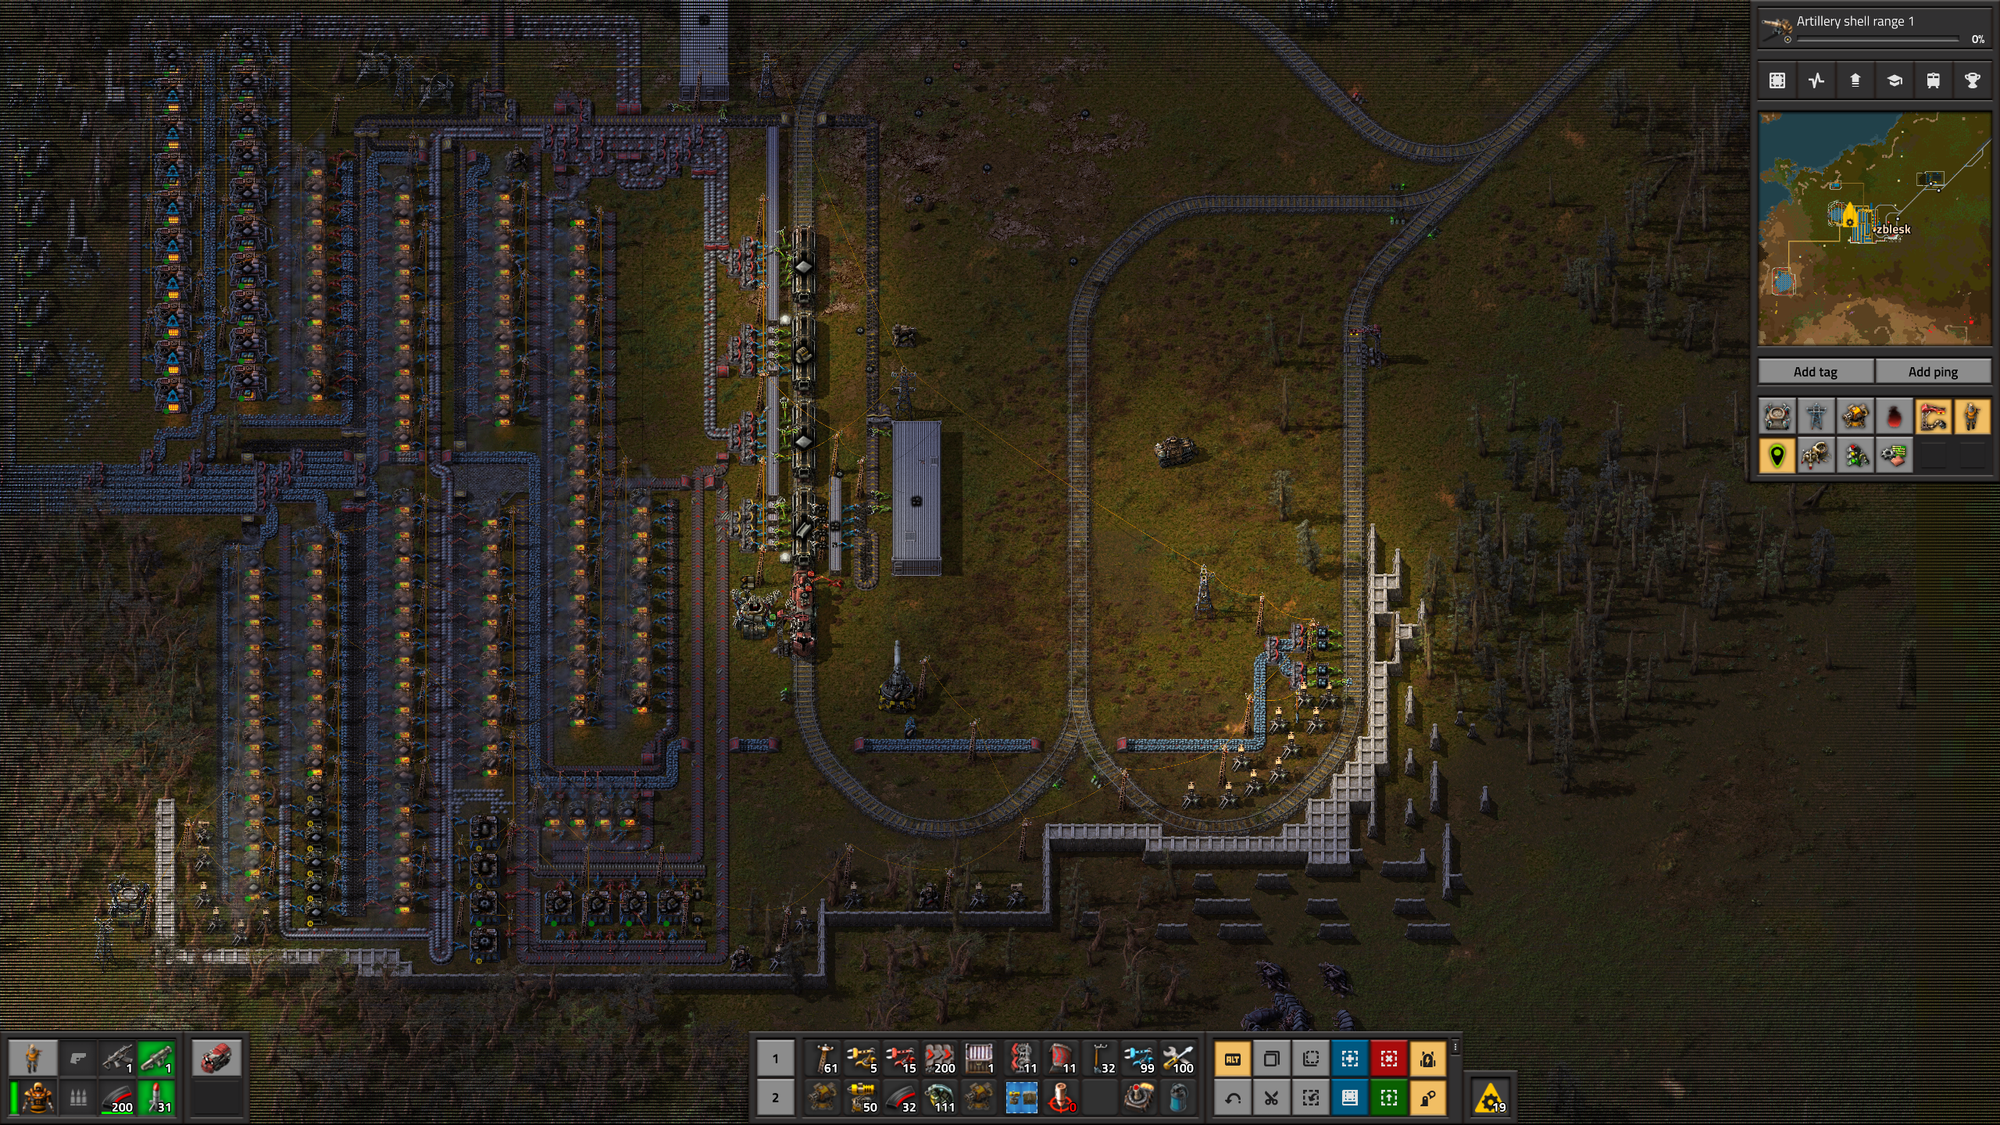 Playing Factorio feels like hobby programming